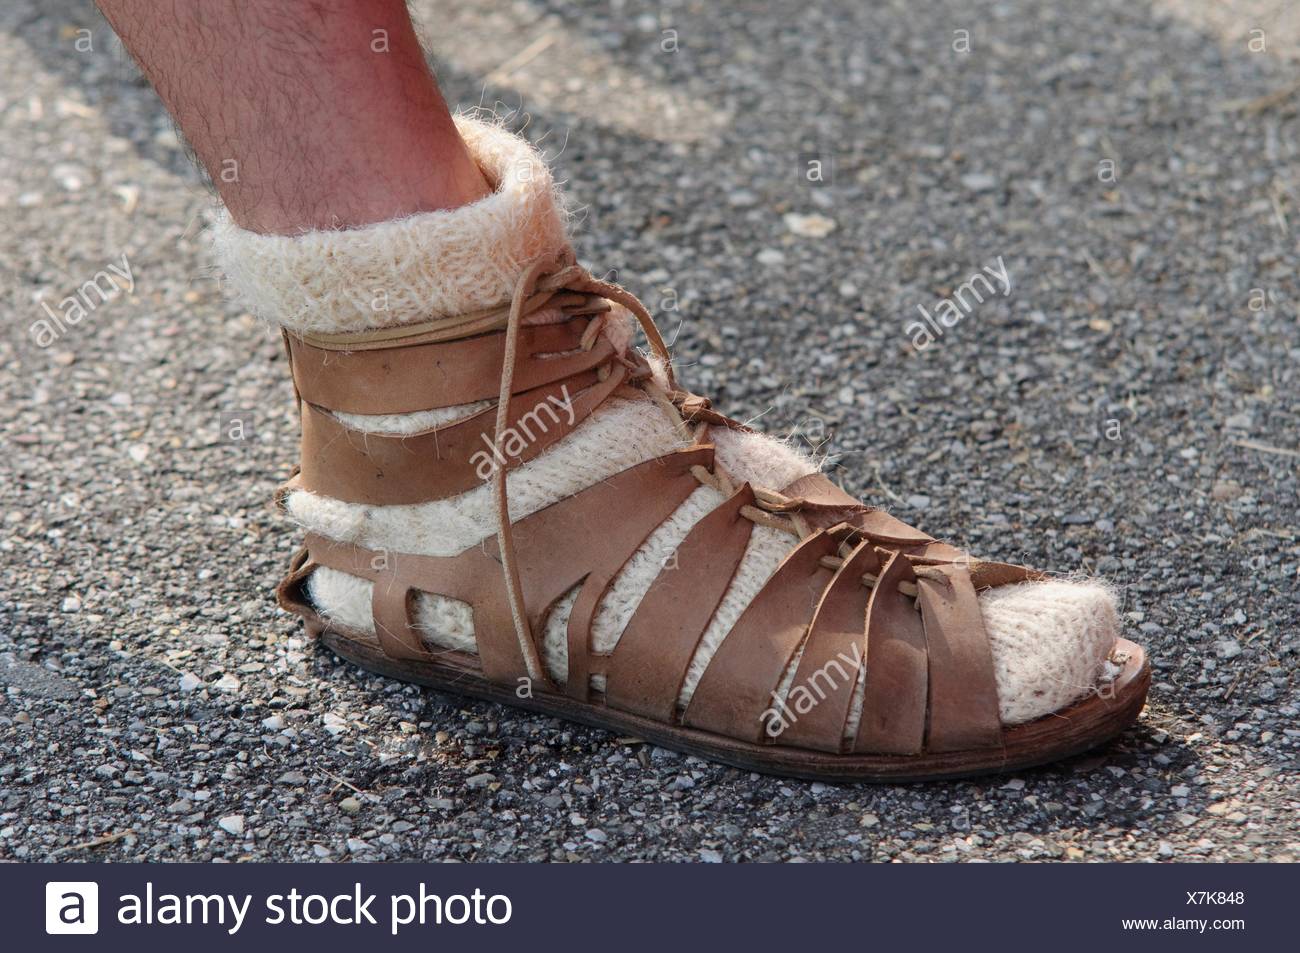 Roman Soldiers Sandal High Resolution Stock Photography and Images - Alamy